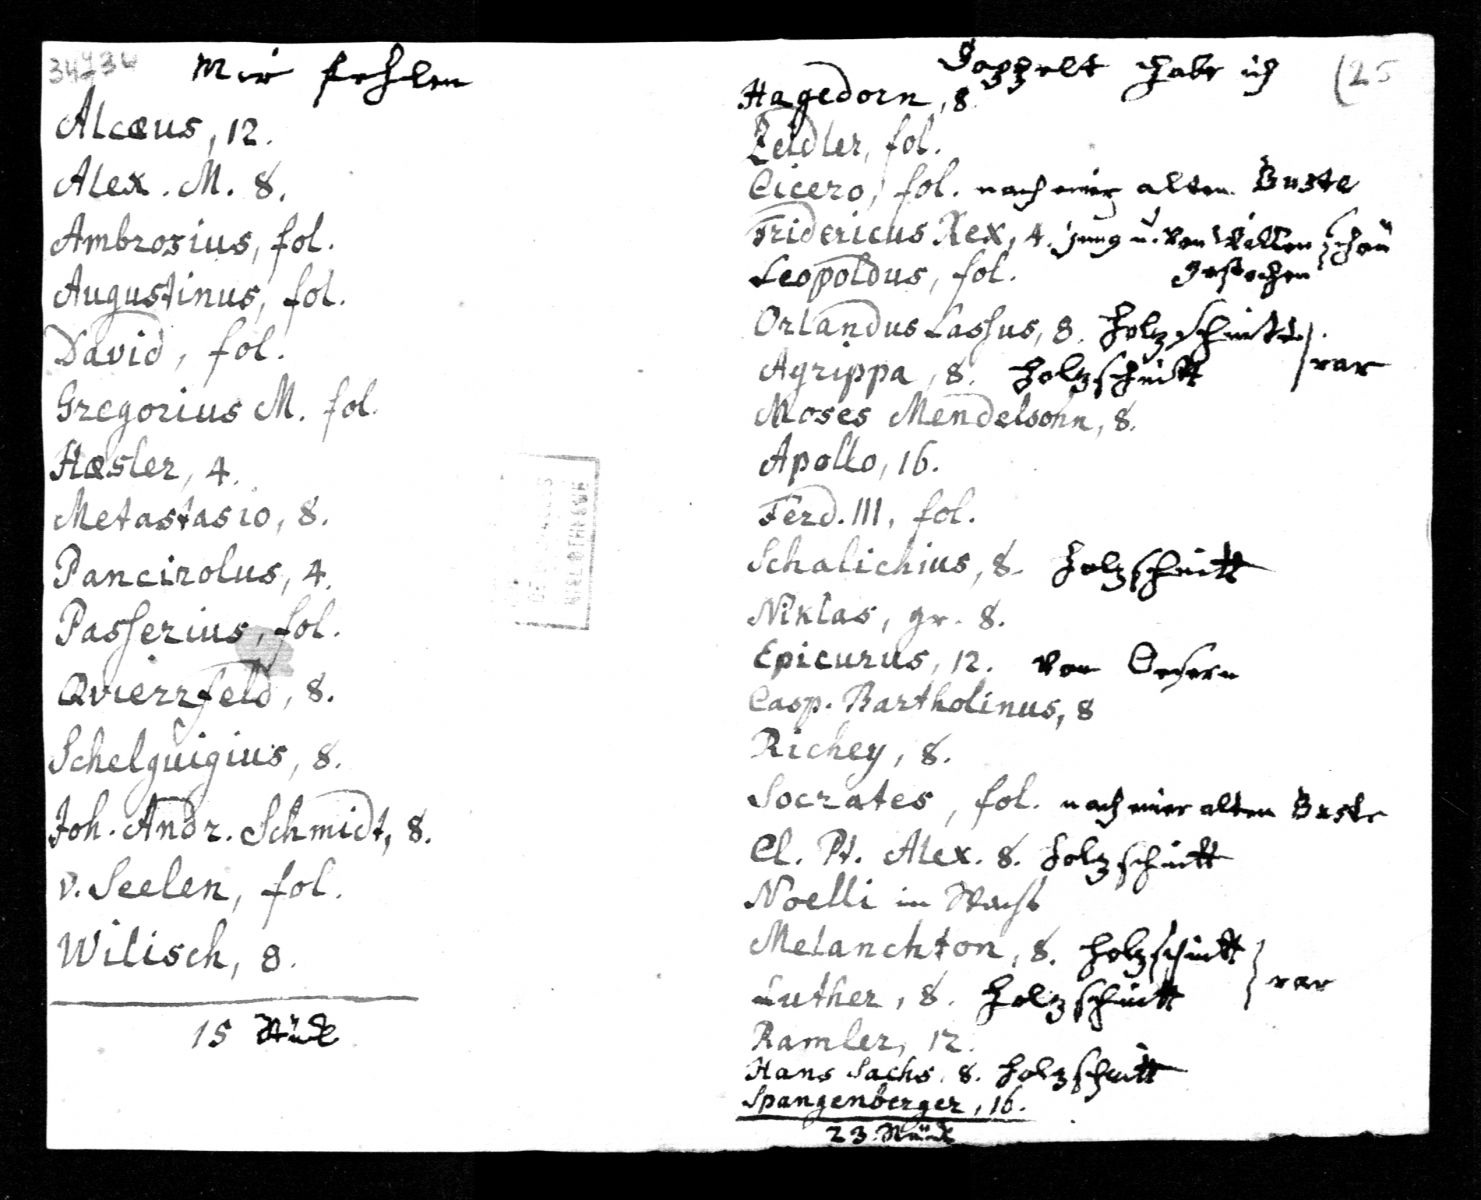 Westphal list of iconography